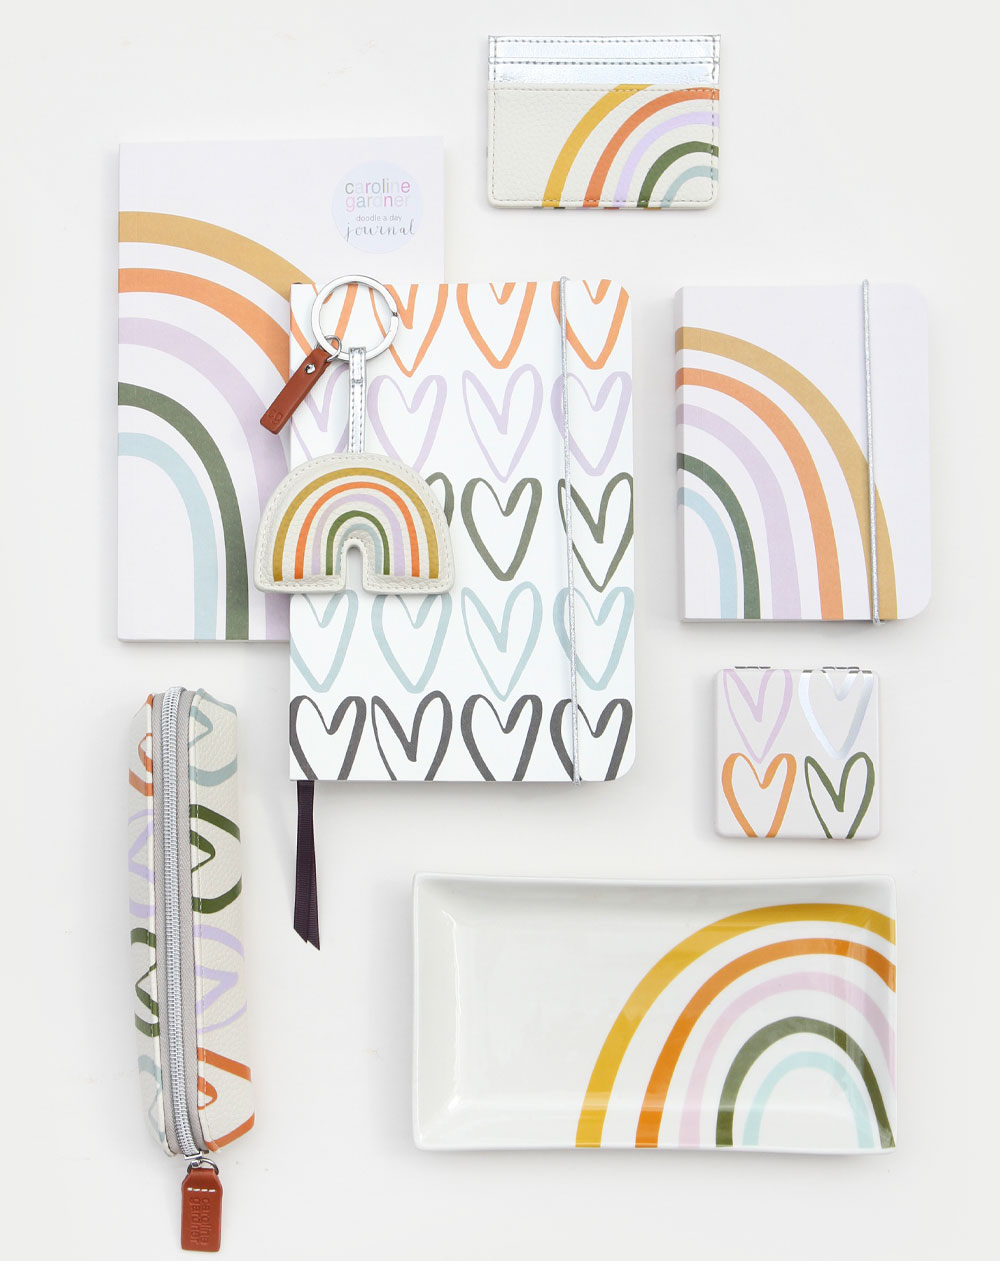 Above: A selection of products from Caroline Gardner’s new Rainbow collection.